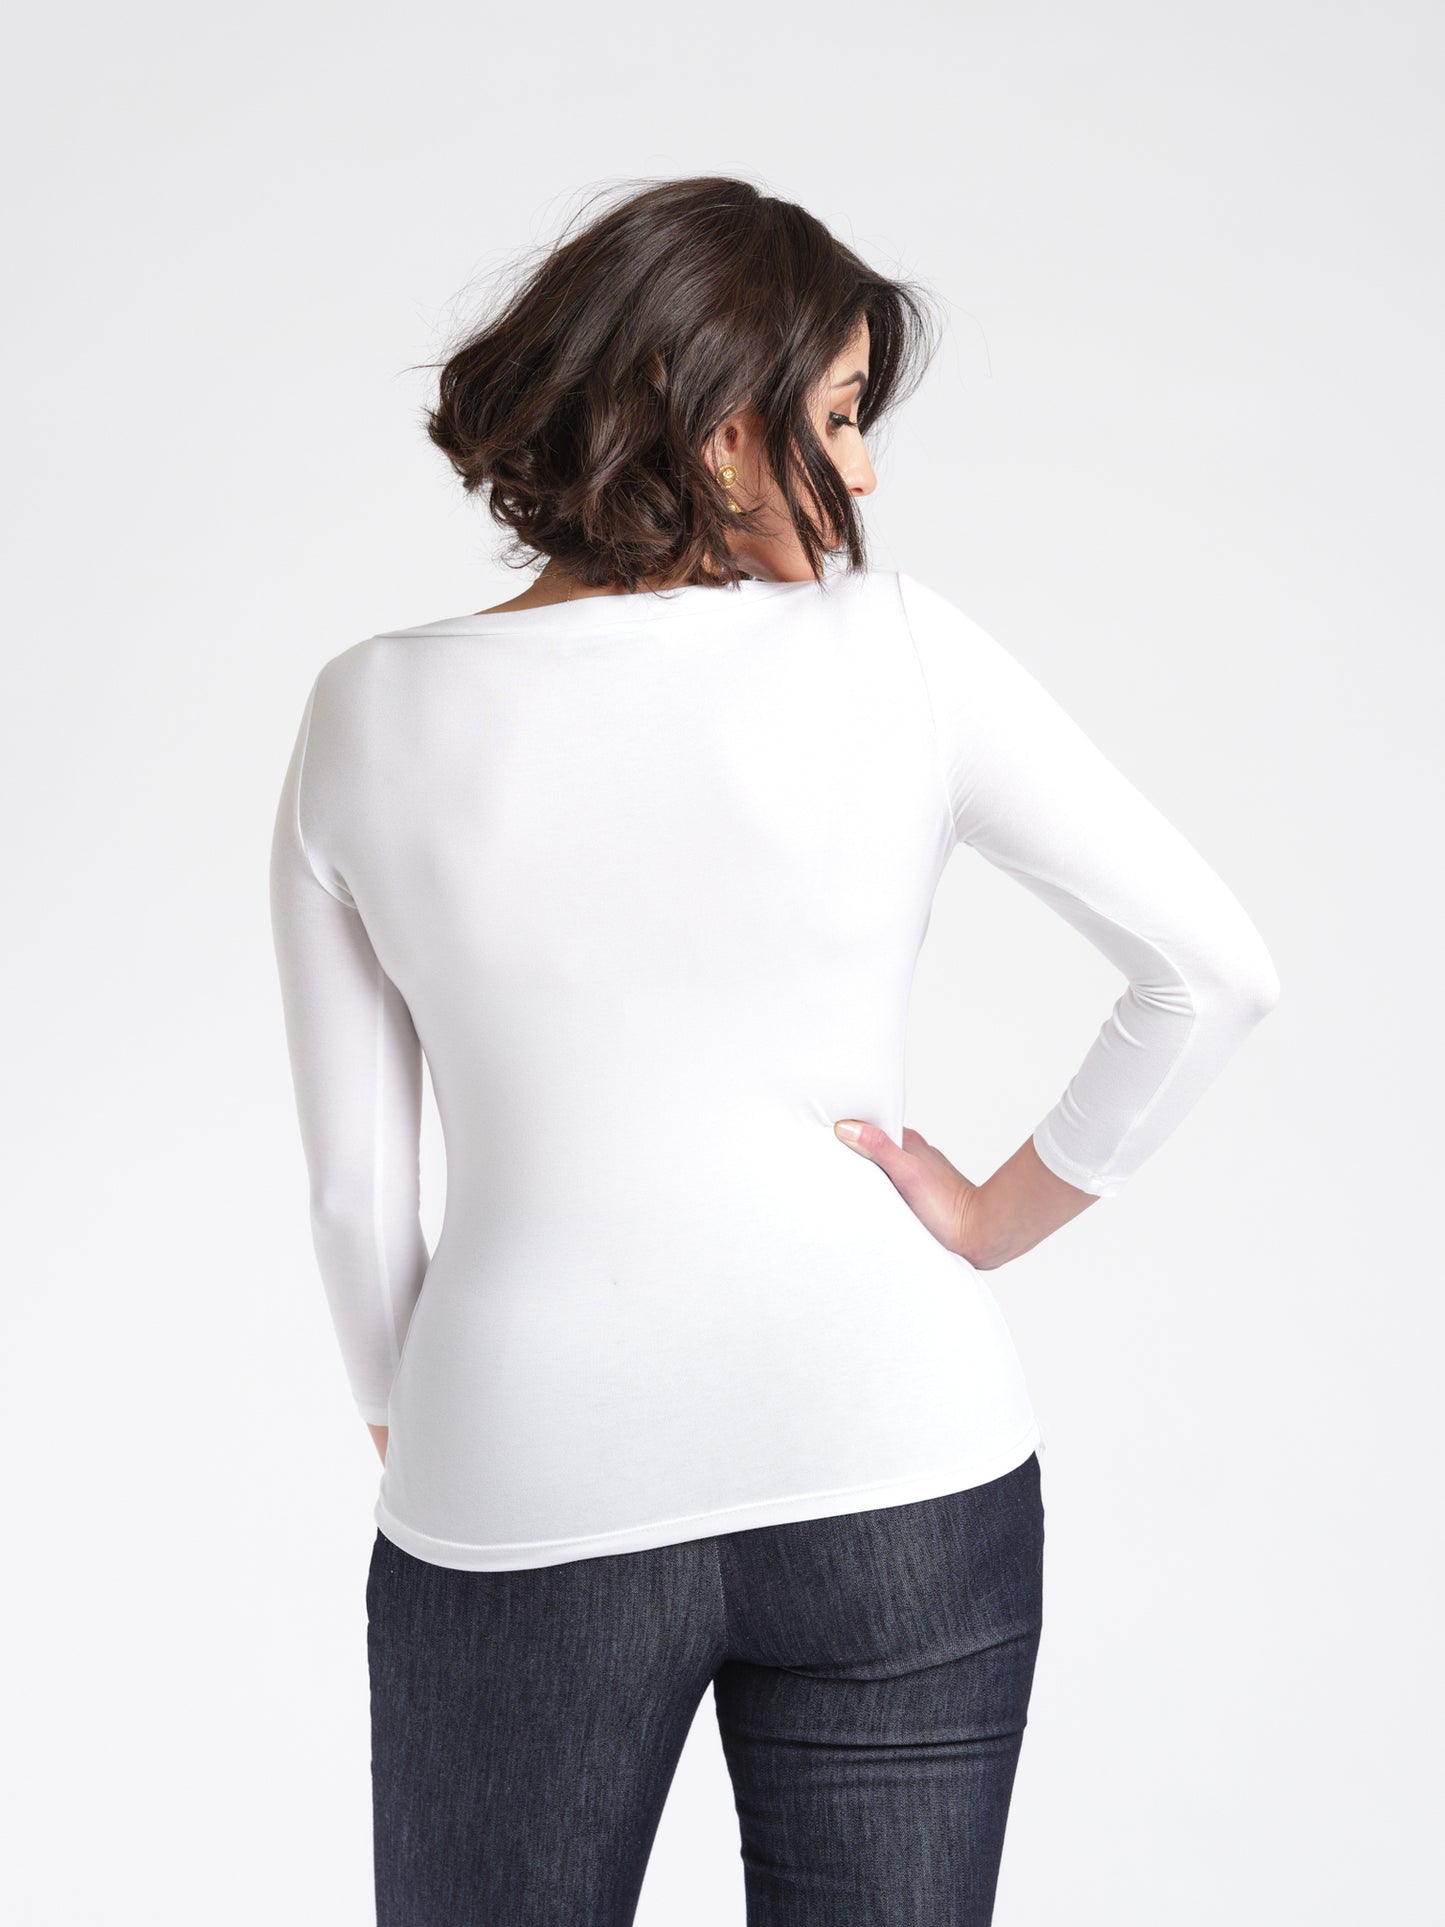 Gwen pullover white back view 3/4 sleeve.